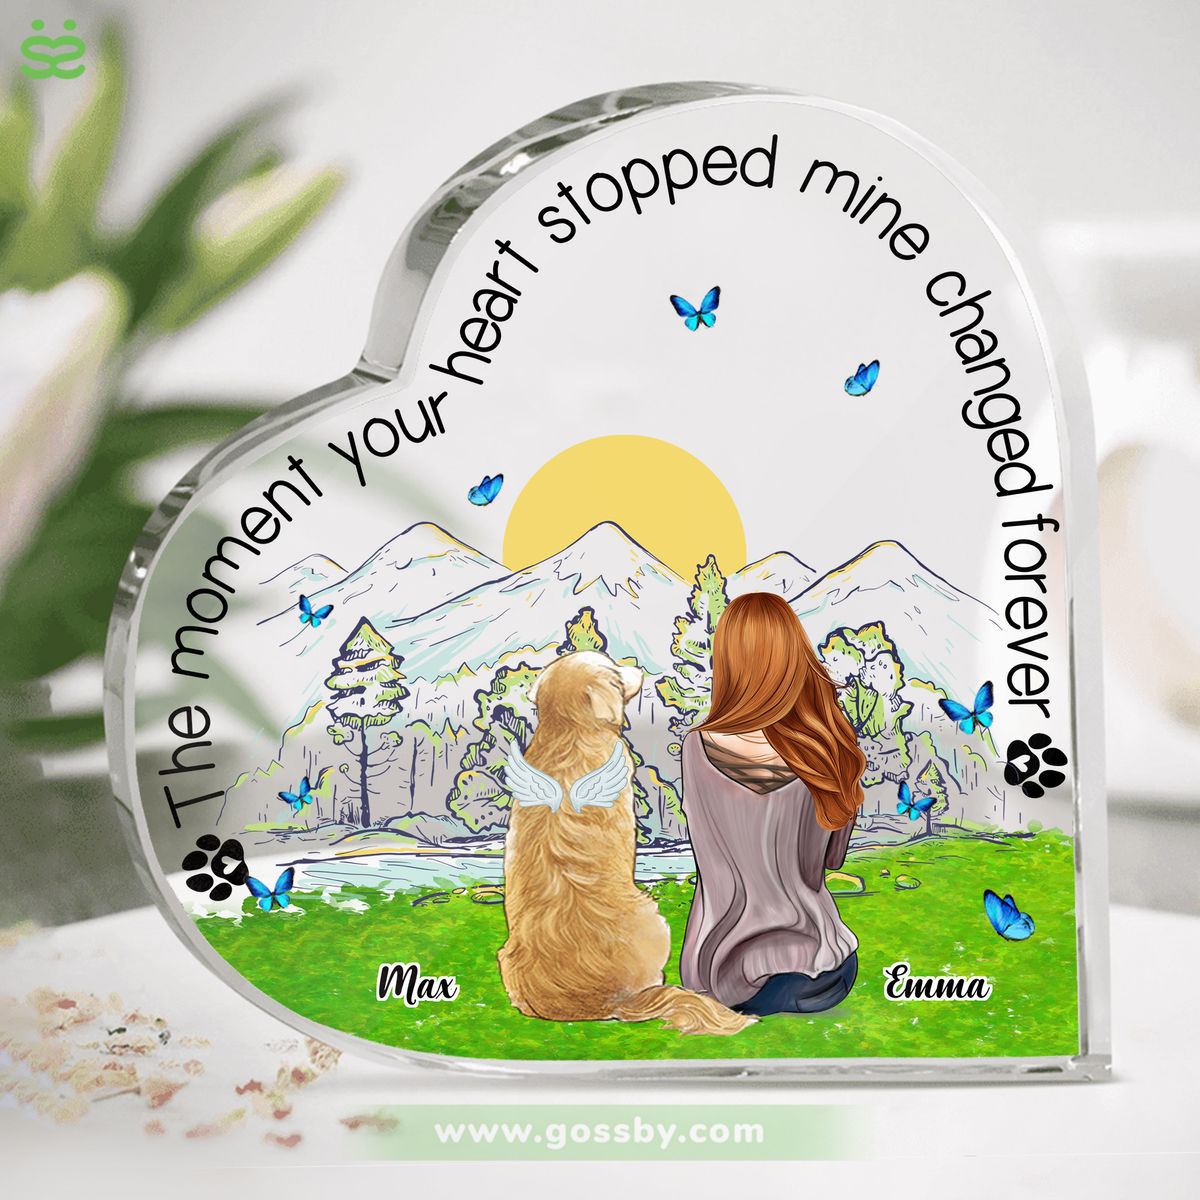 Heart Acrylic Transparent Plaque - Girl and Her Dog - Personalized Heart Shaped Acrylic Plaque - The Moment Your Heart Stopped Mine Changed Forever